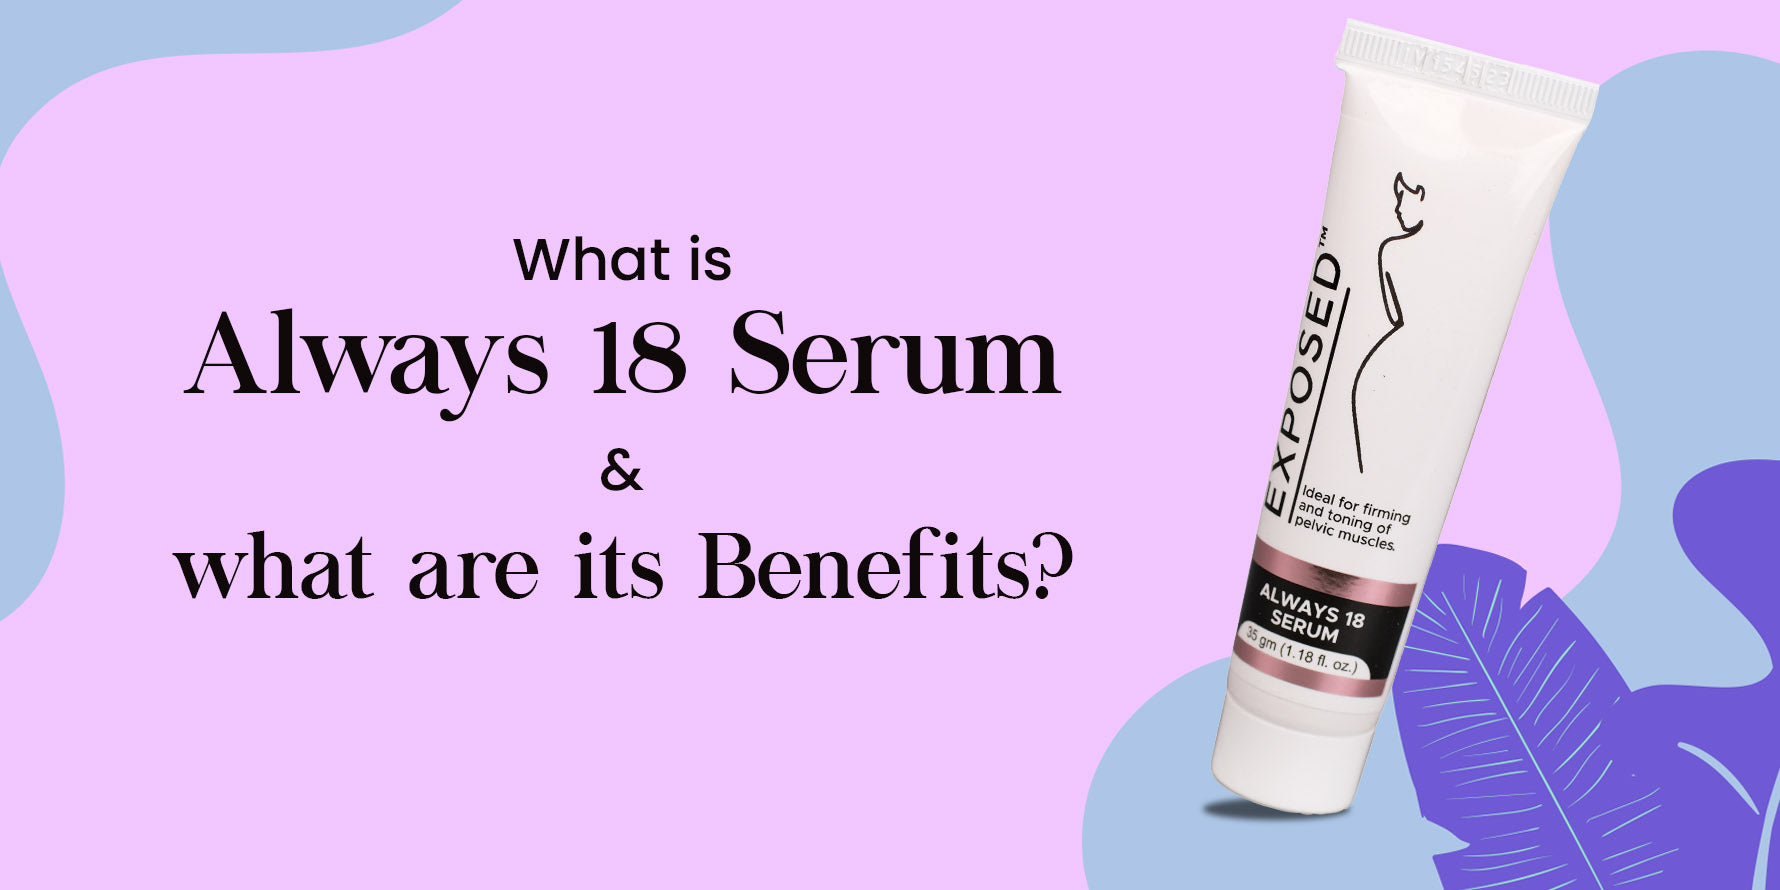 What is Always 18 Serum and what are its Benefits?